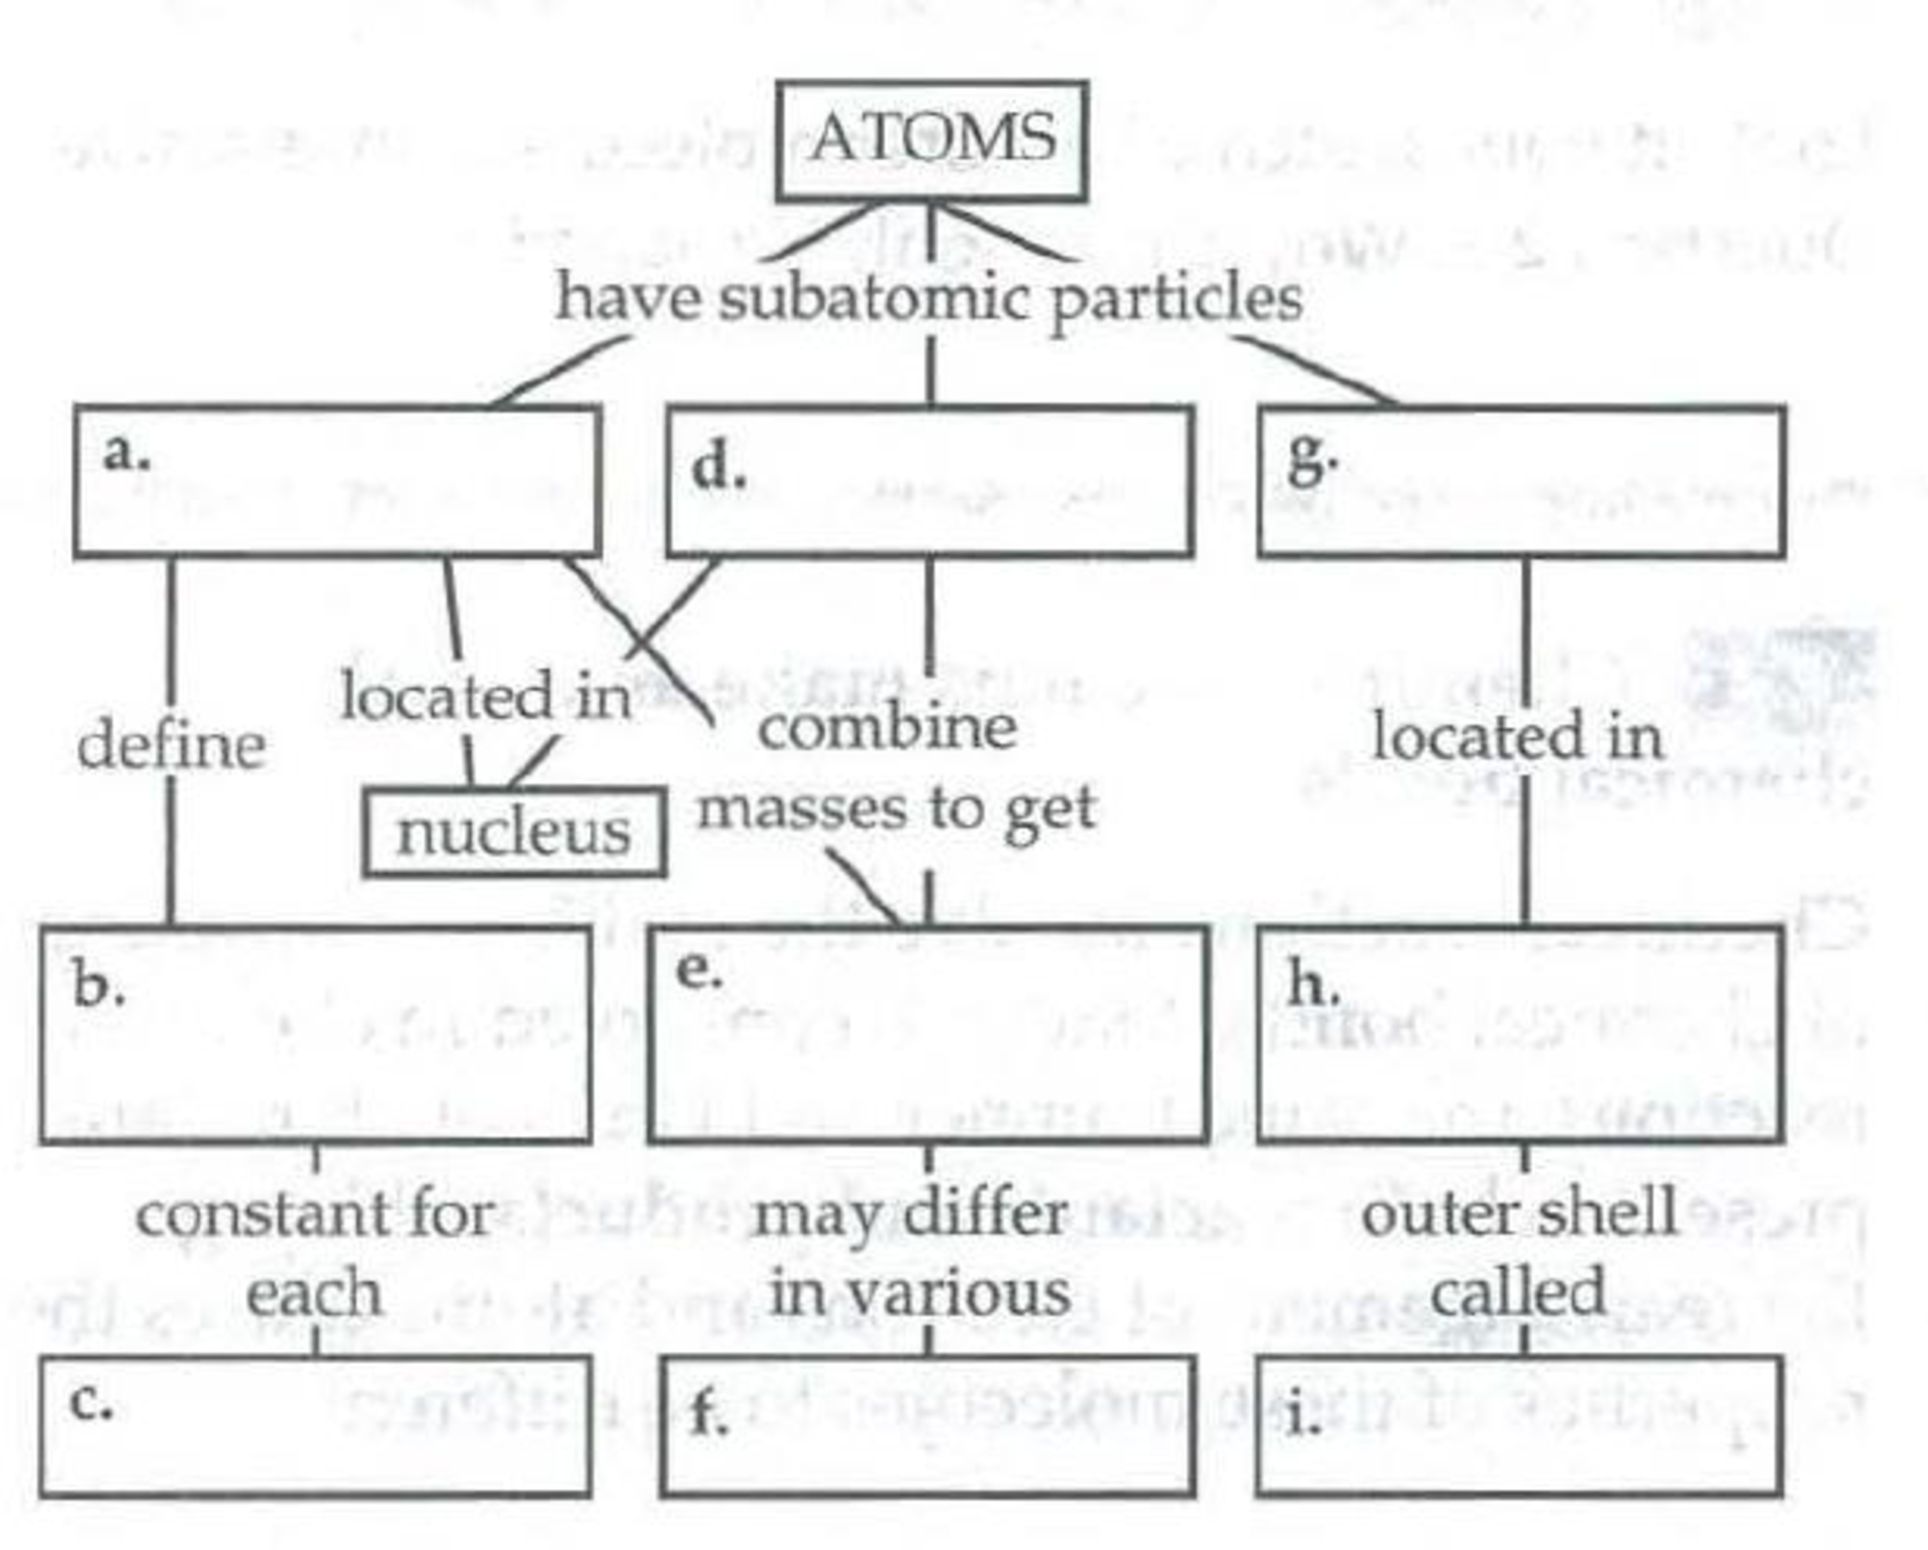 Chapter 2, Problem 5IQ, Fill in the blanks in the following concept map to help you review the atomic structure of atoms. 